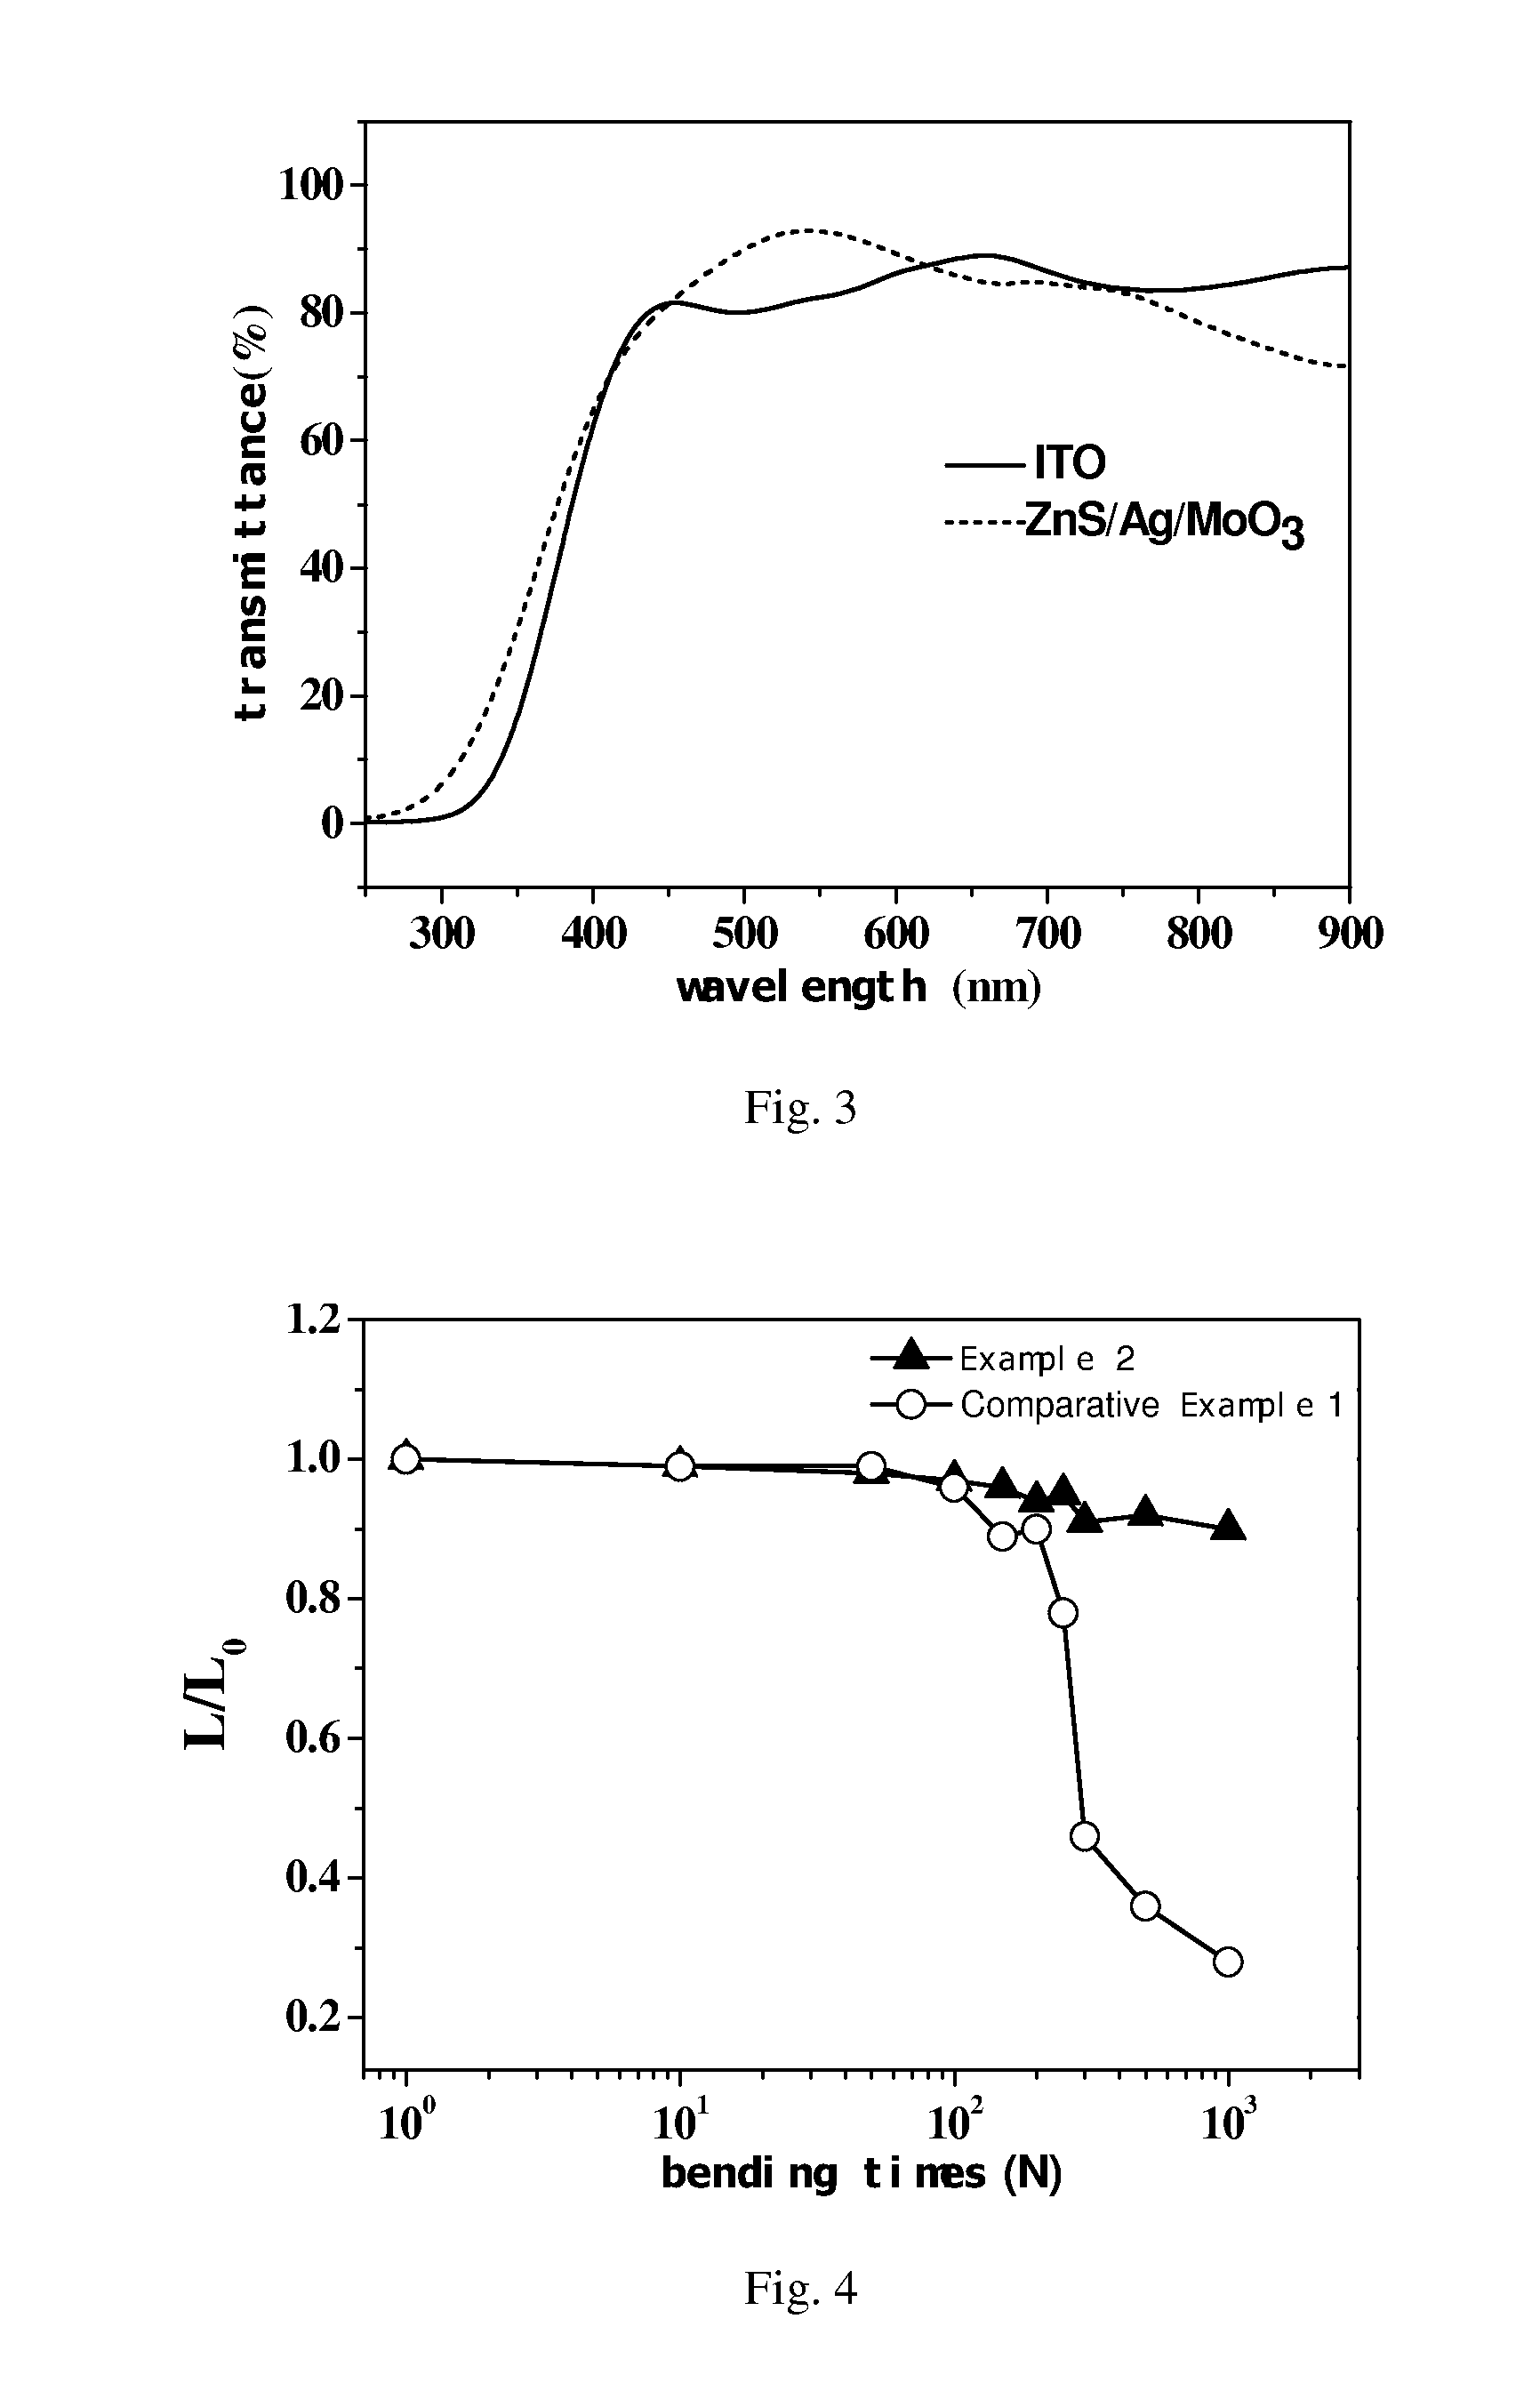 Flexible organic electroluminescent device and manufacturing method thereof